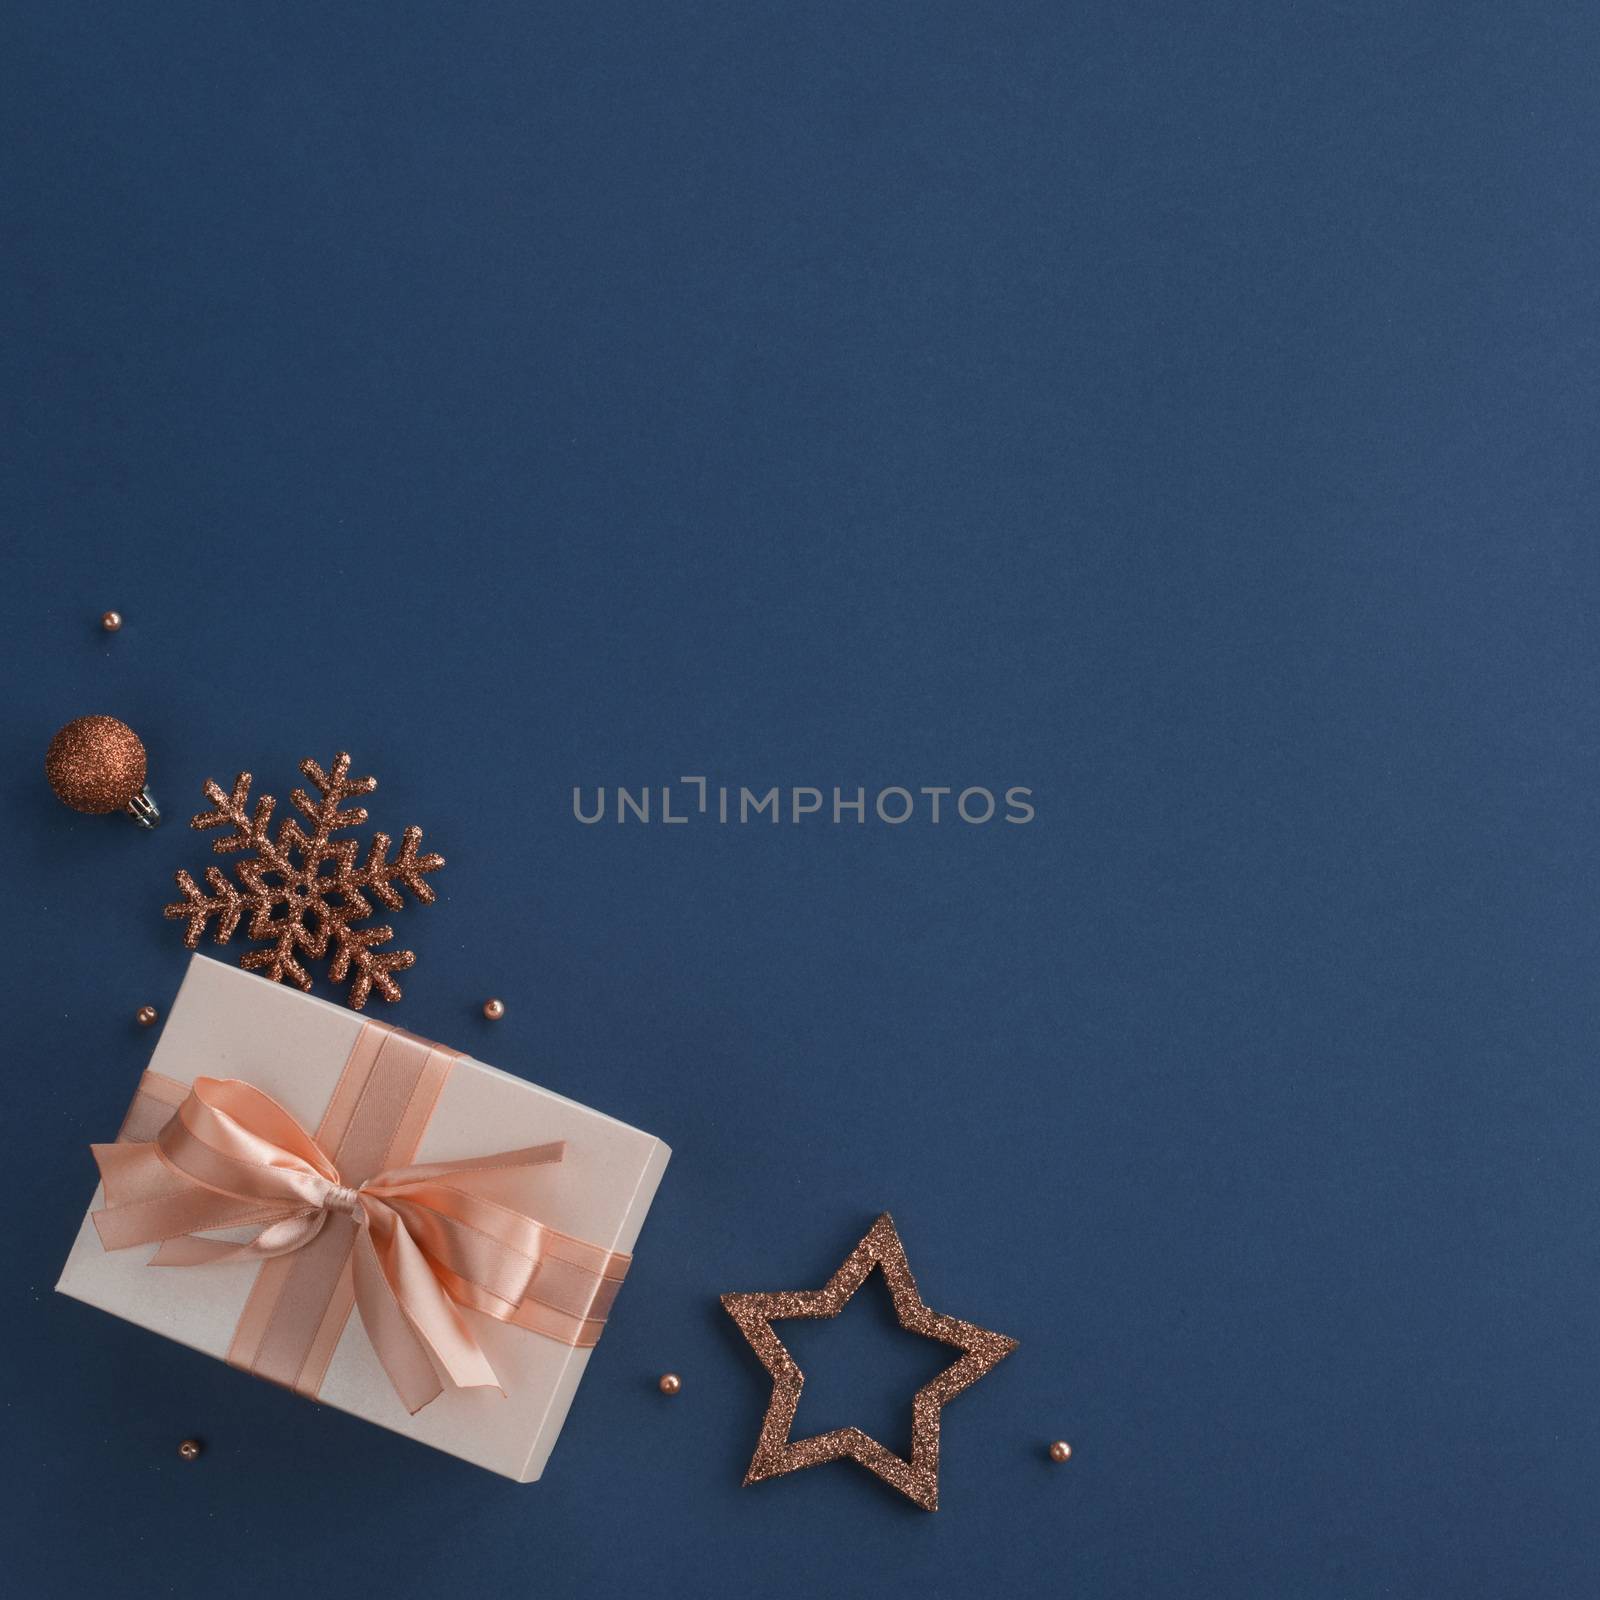 Unusual Christmas gift on stylish dark blue background with copy space for text , top view flat lay design composition